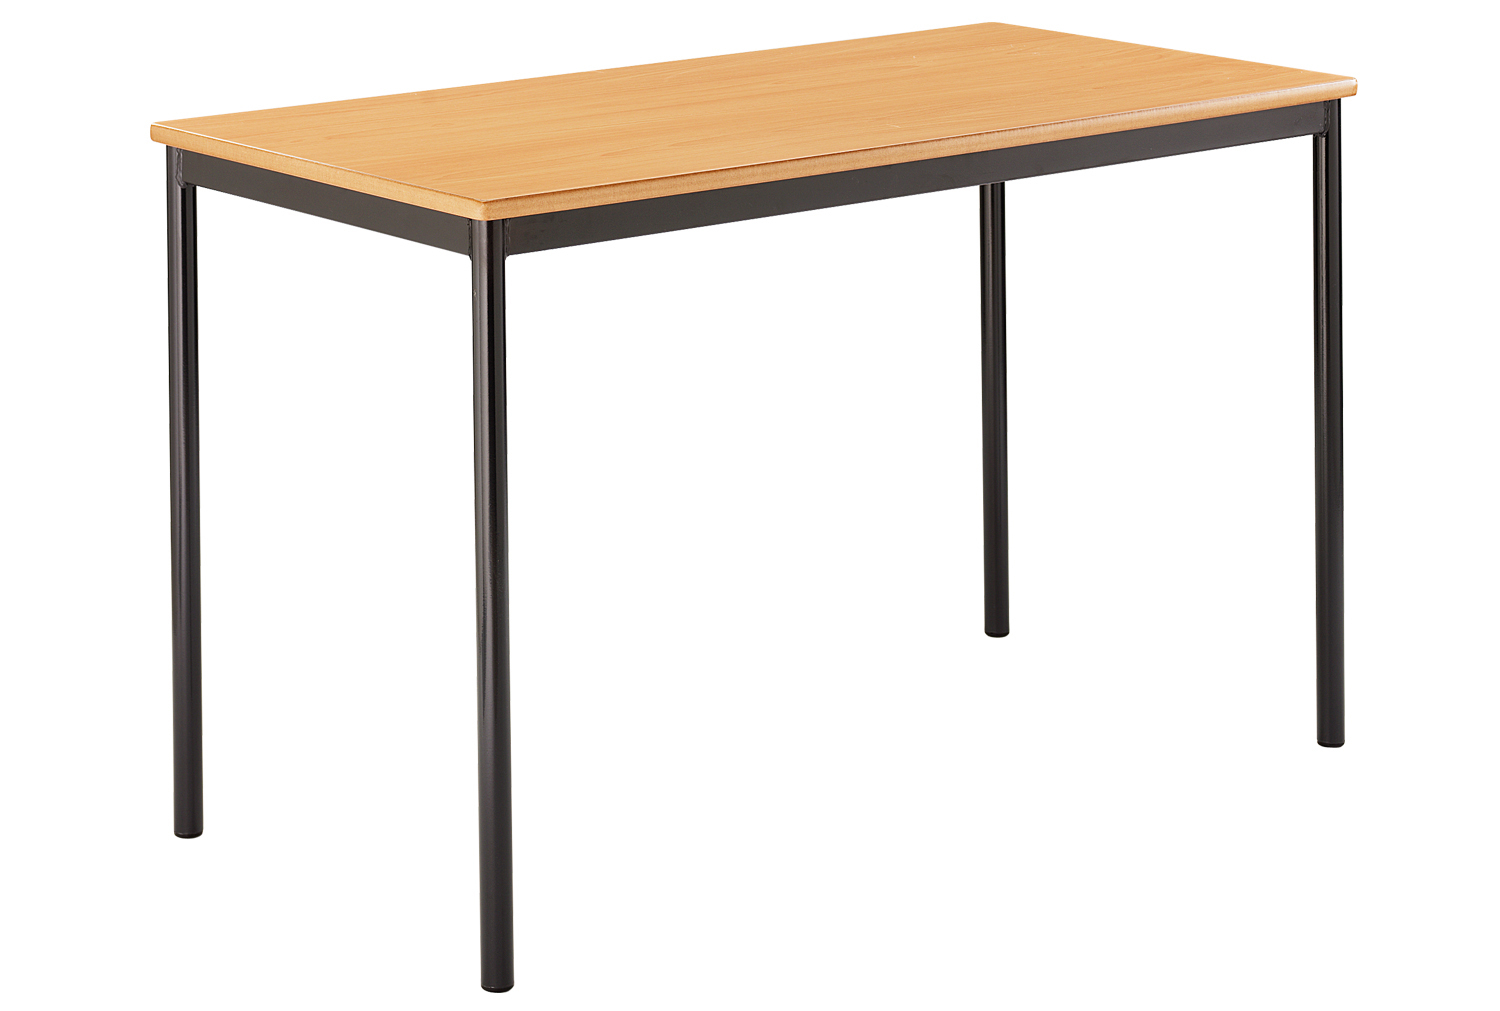 Qty 4 - Rectangular Fully Welded Classroom Tables 14+ Years, 120wx60dx76h (cm), Light Grey Frame, Ailsa Top, PU Grey Edge